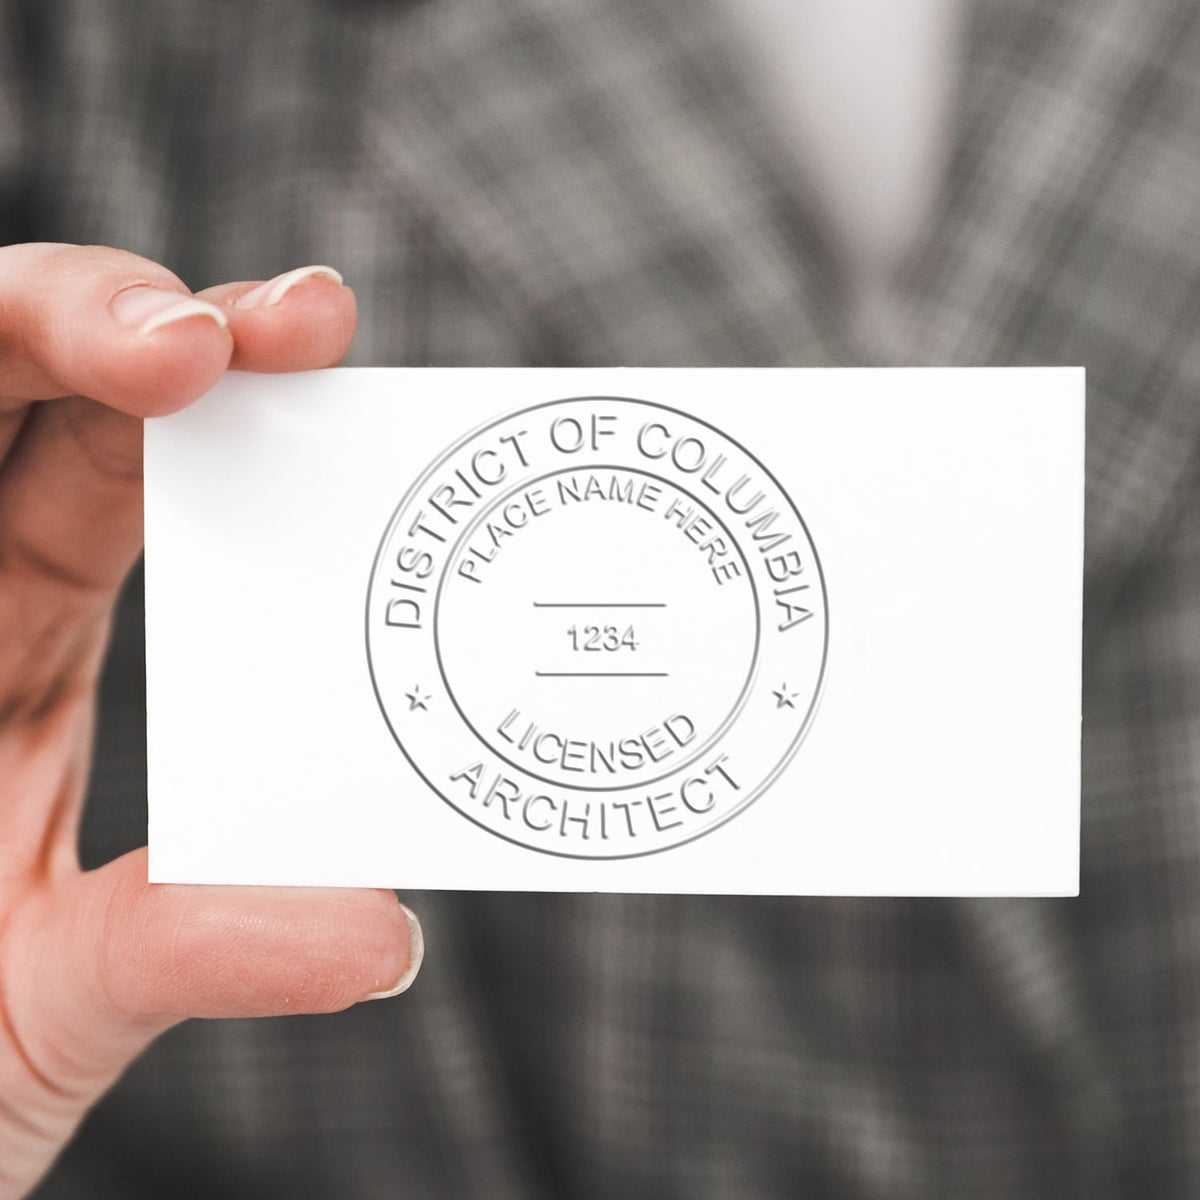 This paper is stamped with a sample imprint of the Handheld District of Columbia Architect Seal Embosser, signifying its quality and reliability.